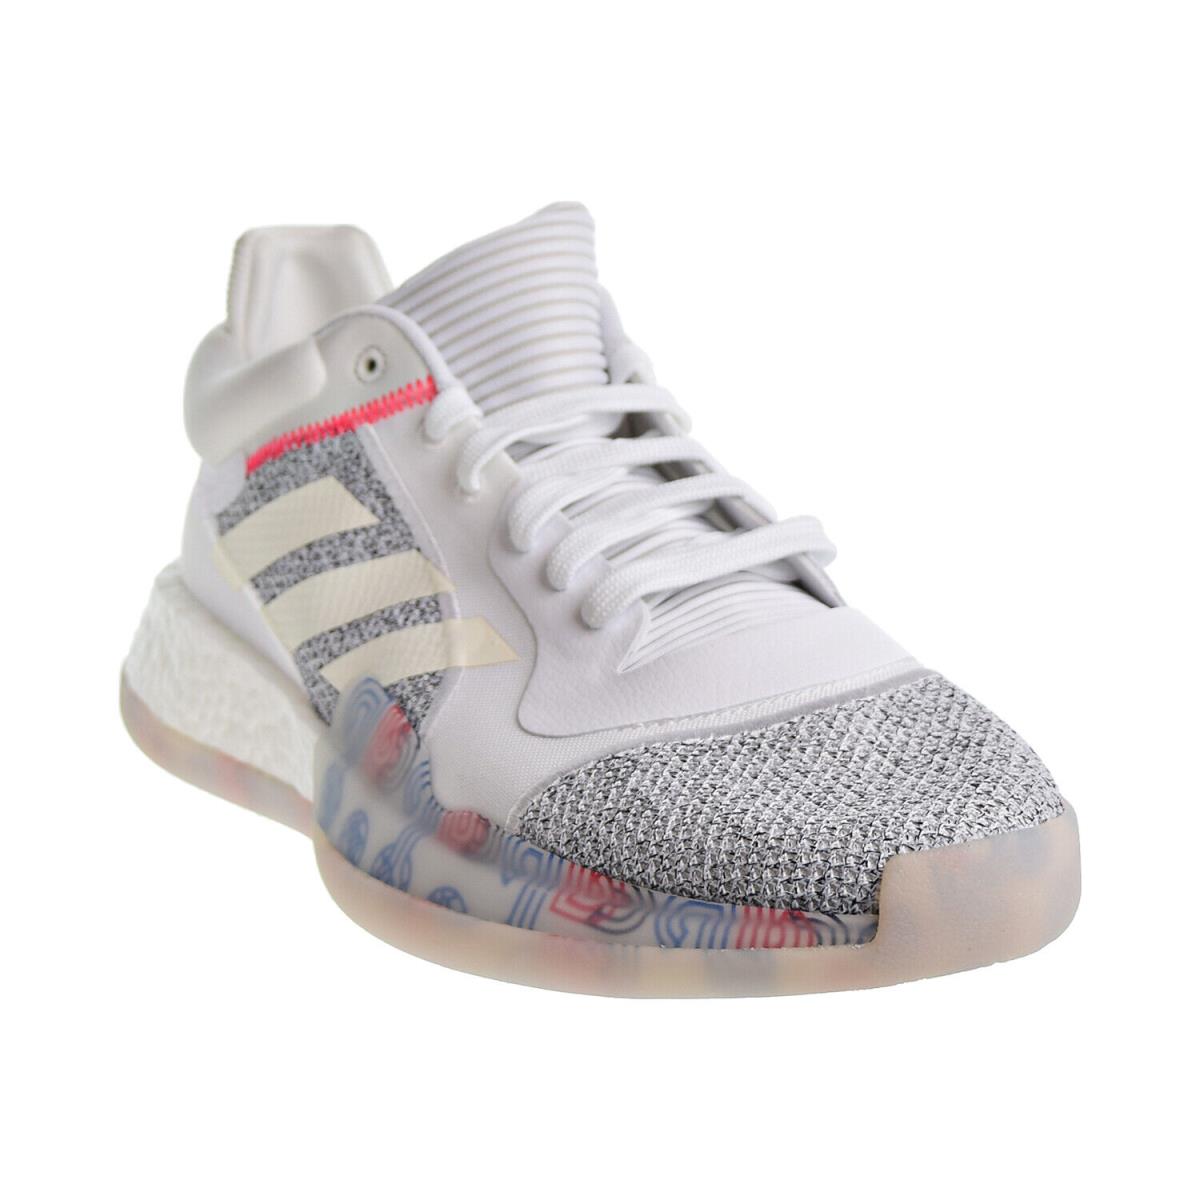 Adidas Marquee Boost Low Men`s Basketball Shoes White-off White-cyan g27745 - Cloud White-Off White-Shock Cyan